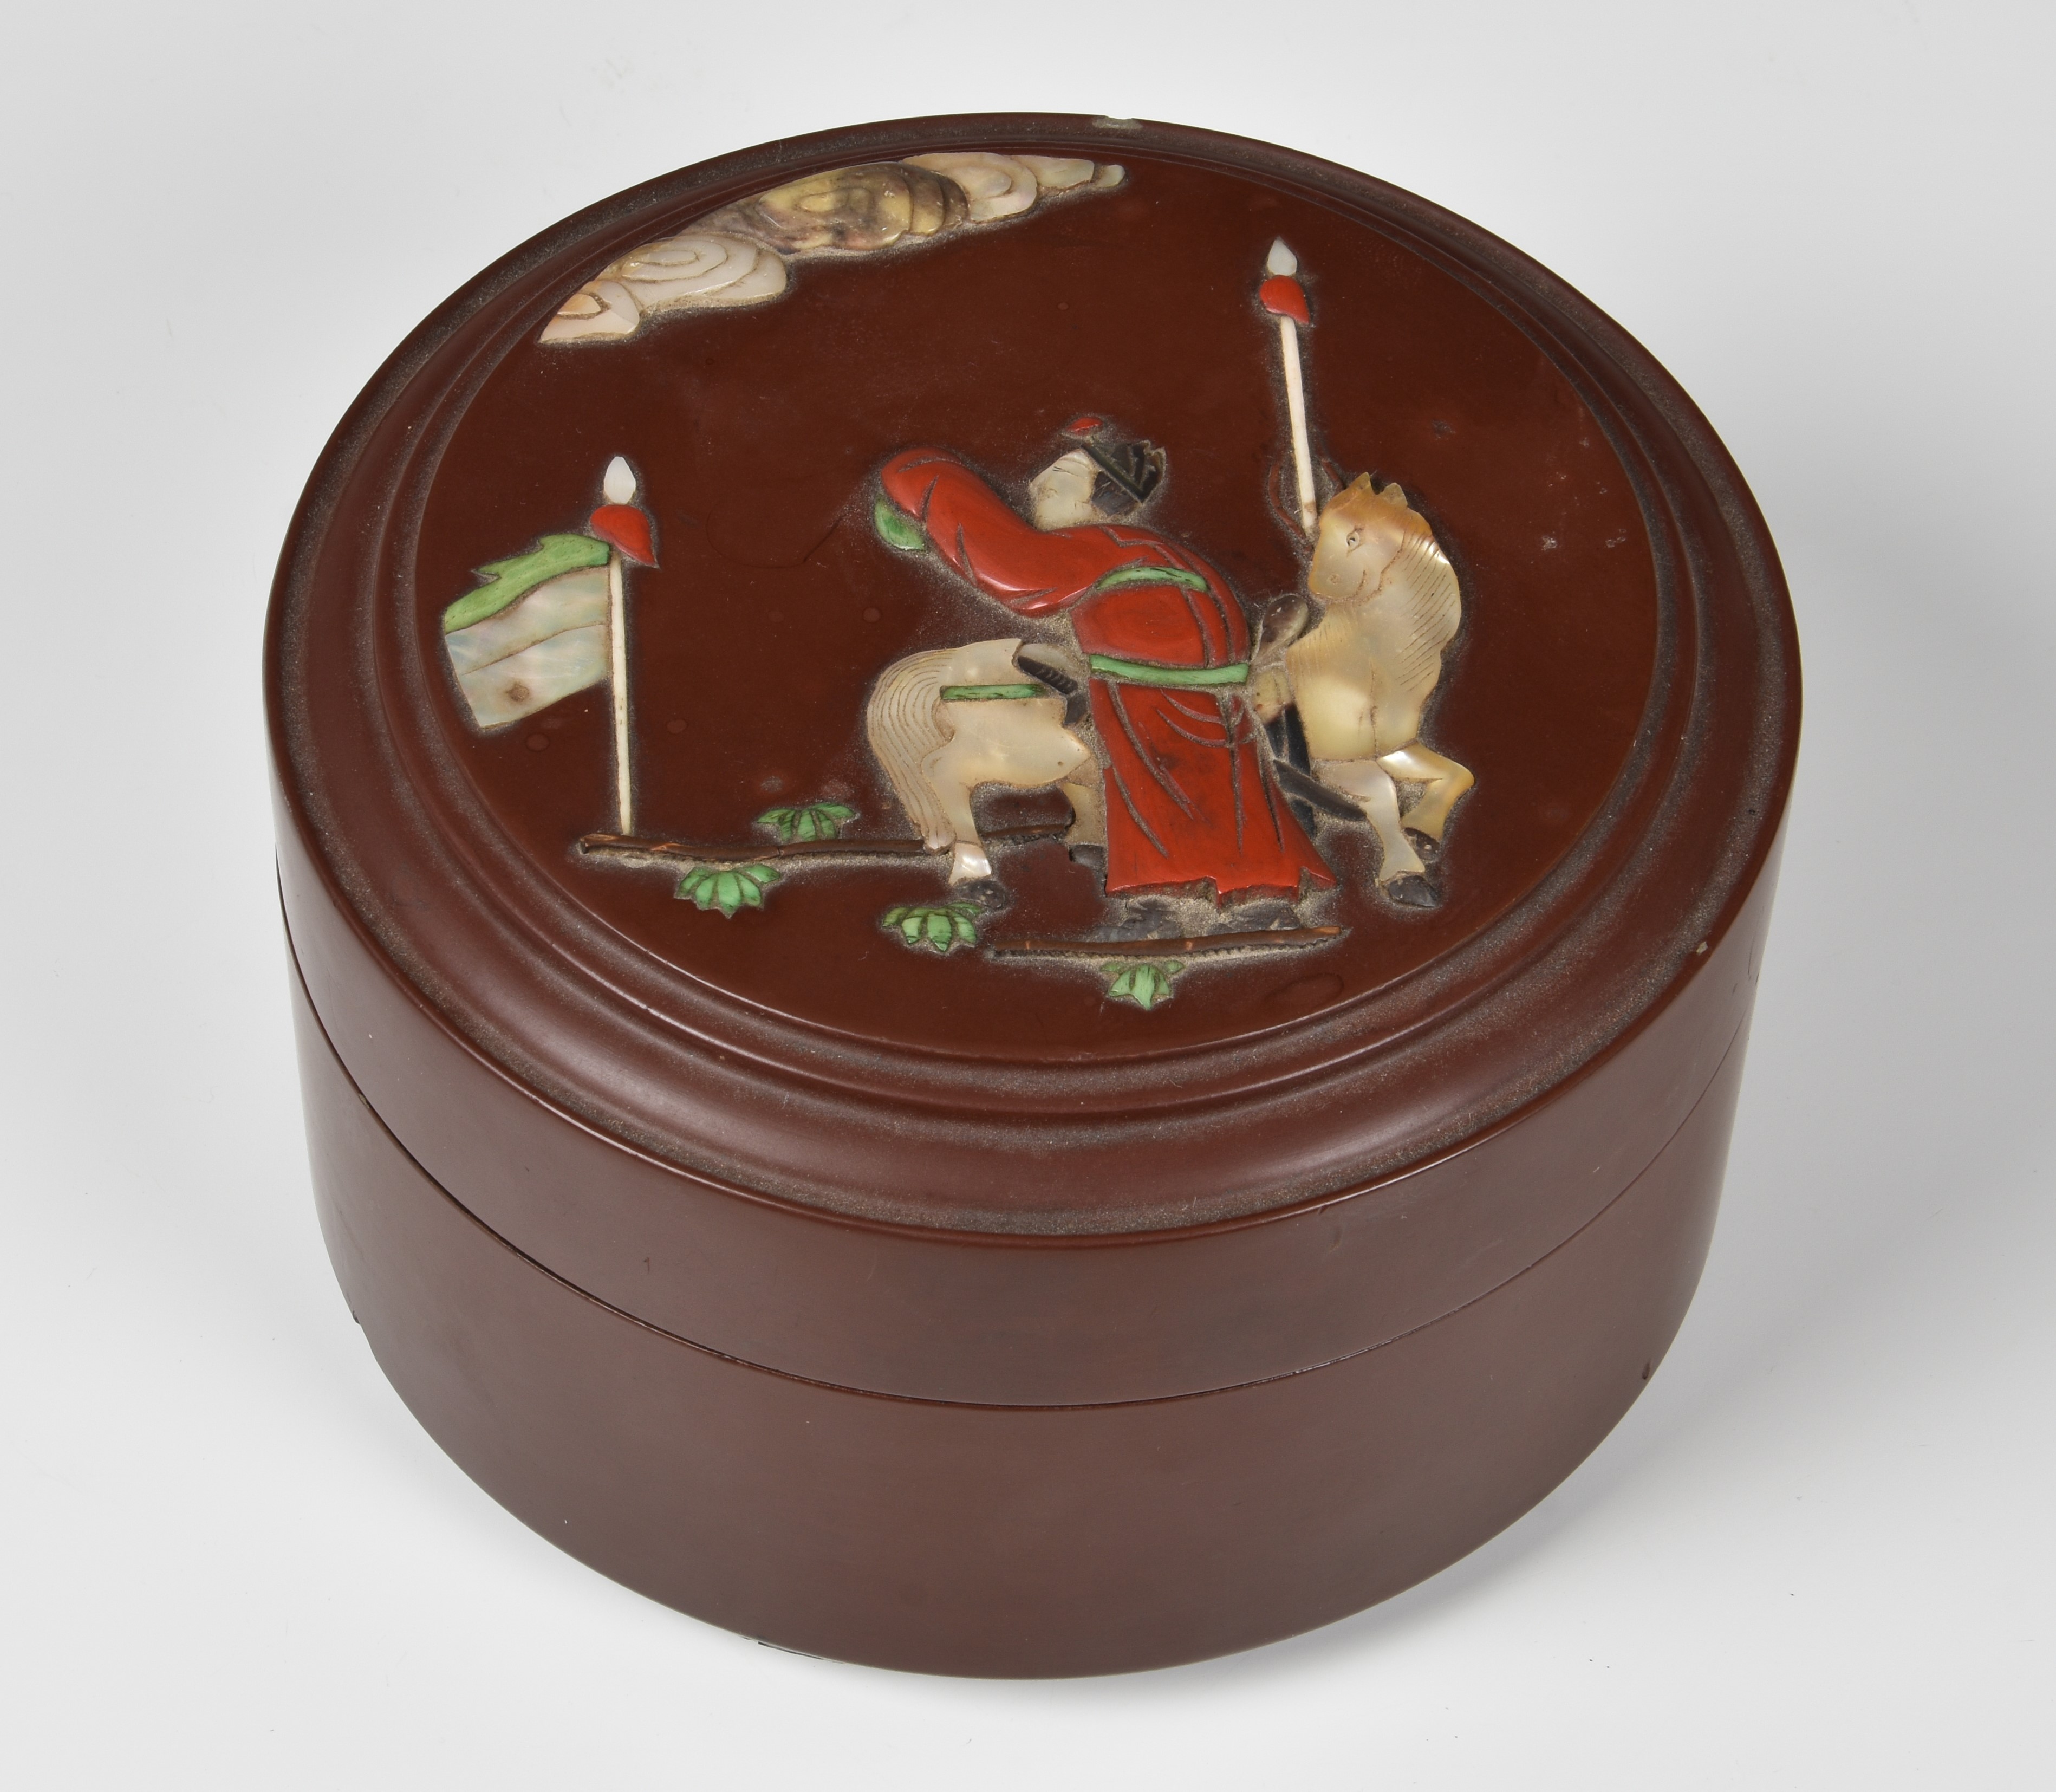 A Chinese lacquer box and cover, probably early 20th century, circular, the cover applied with